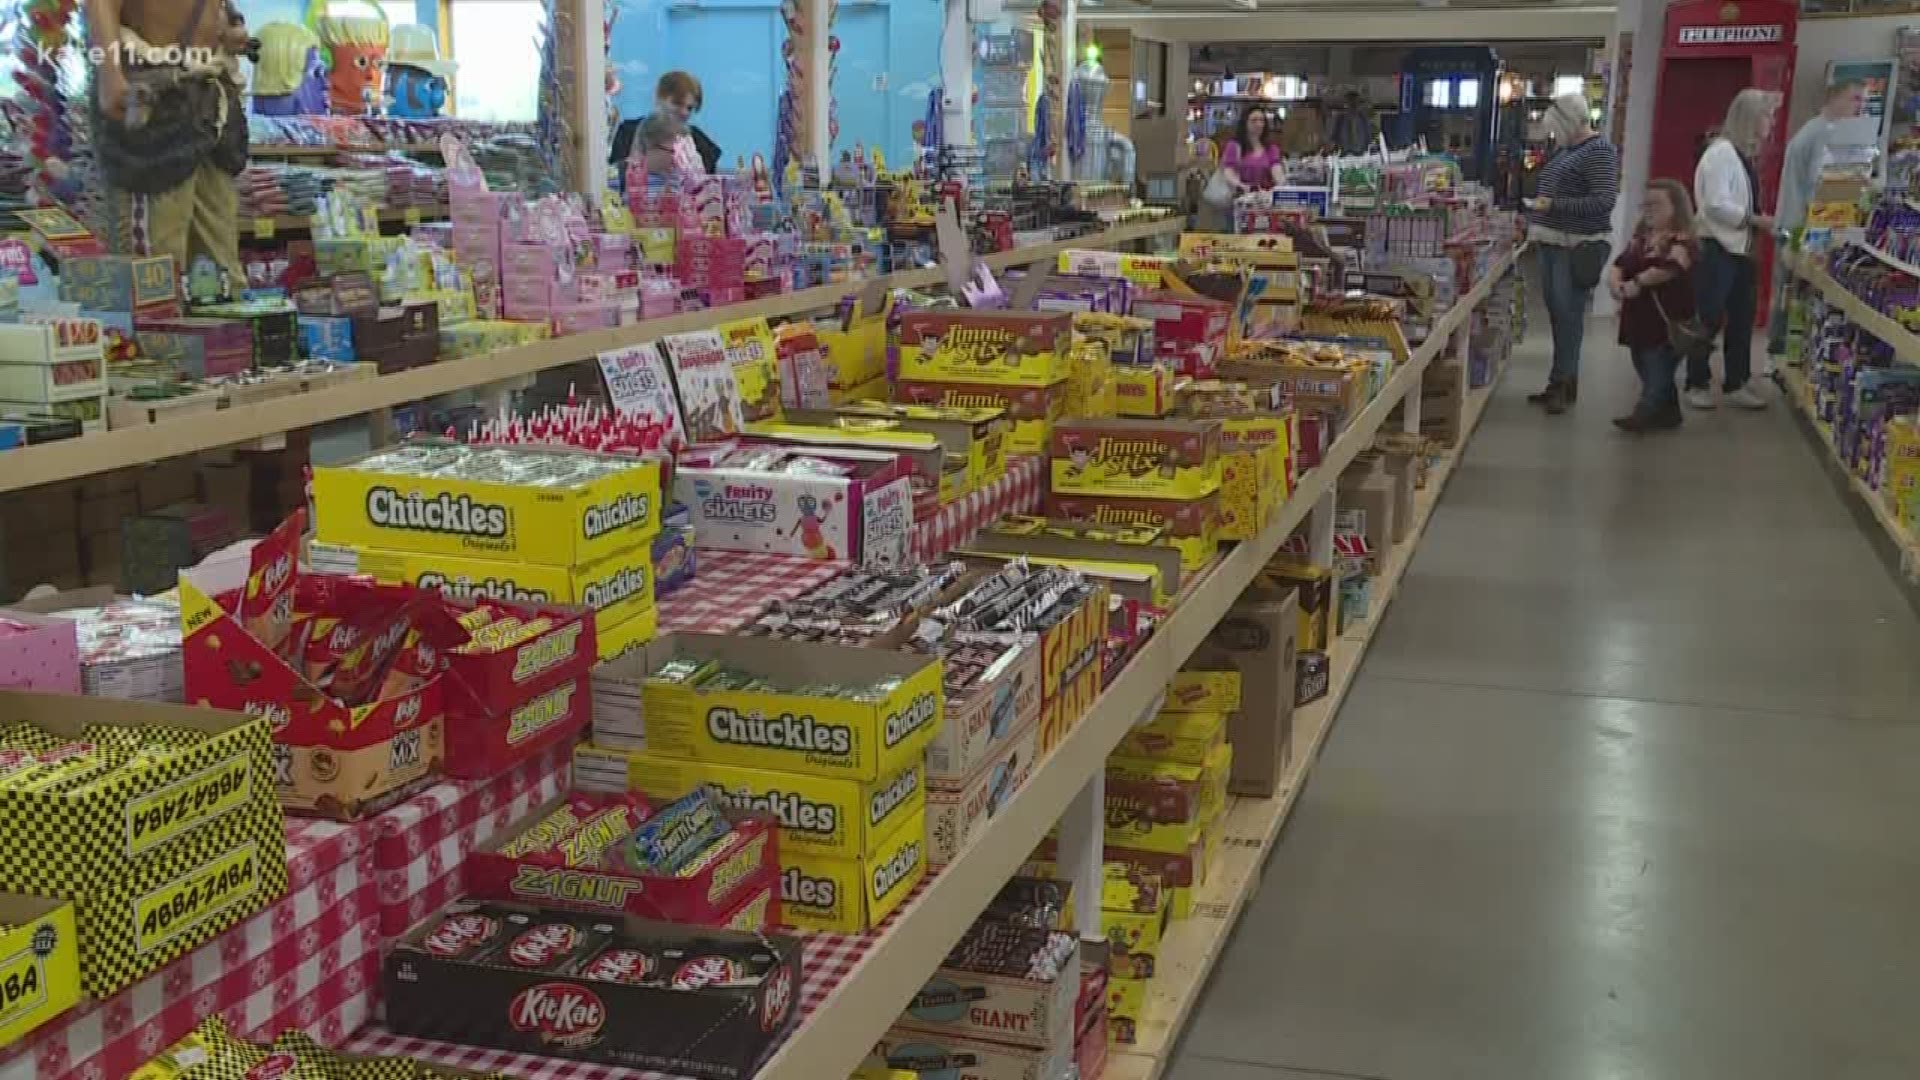 Let the sugar rush begin. Minnesota's Largest Candy Store opened its doors for the new season of sweets.